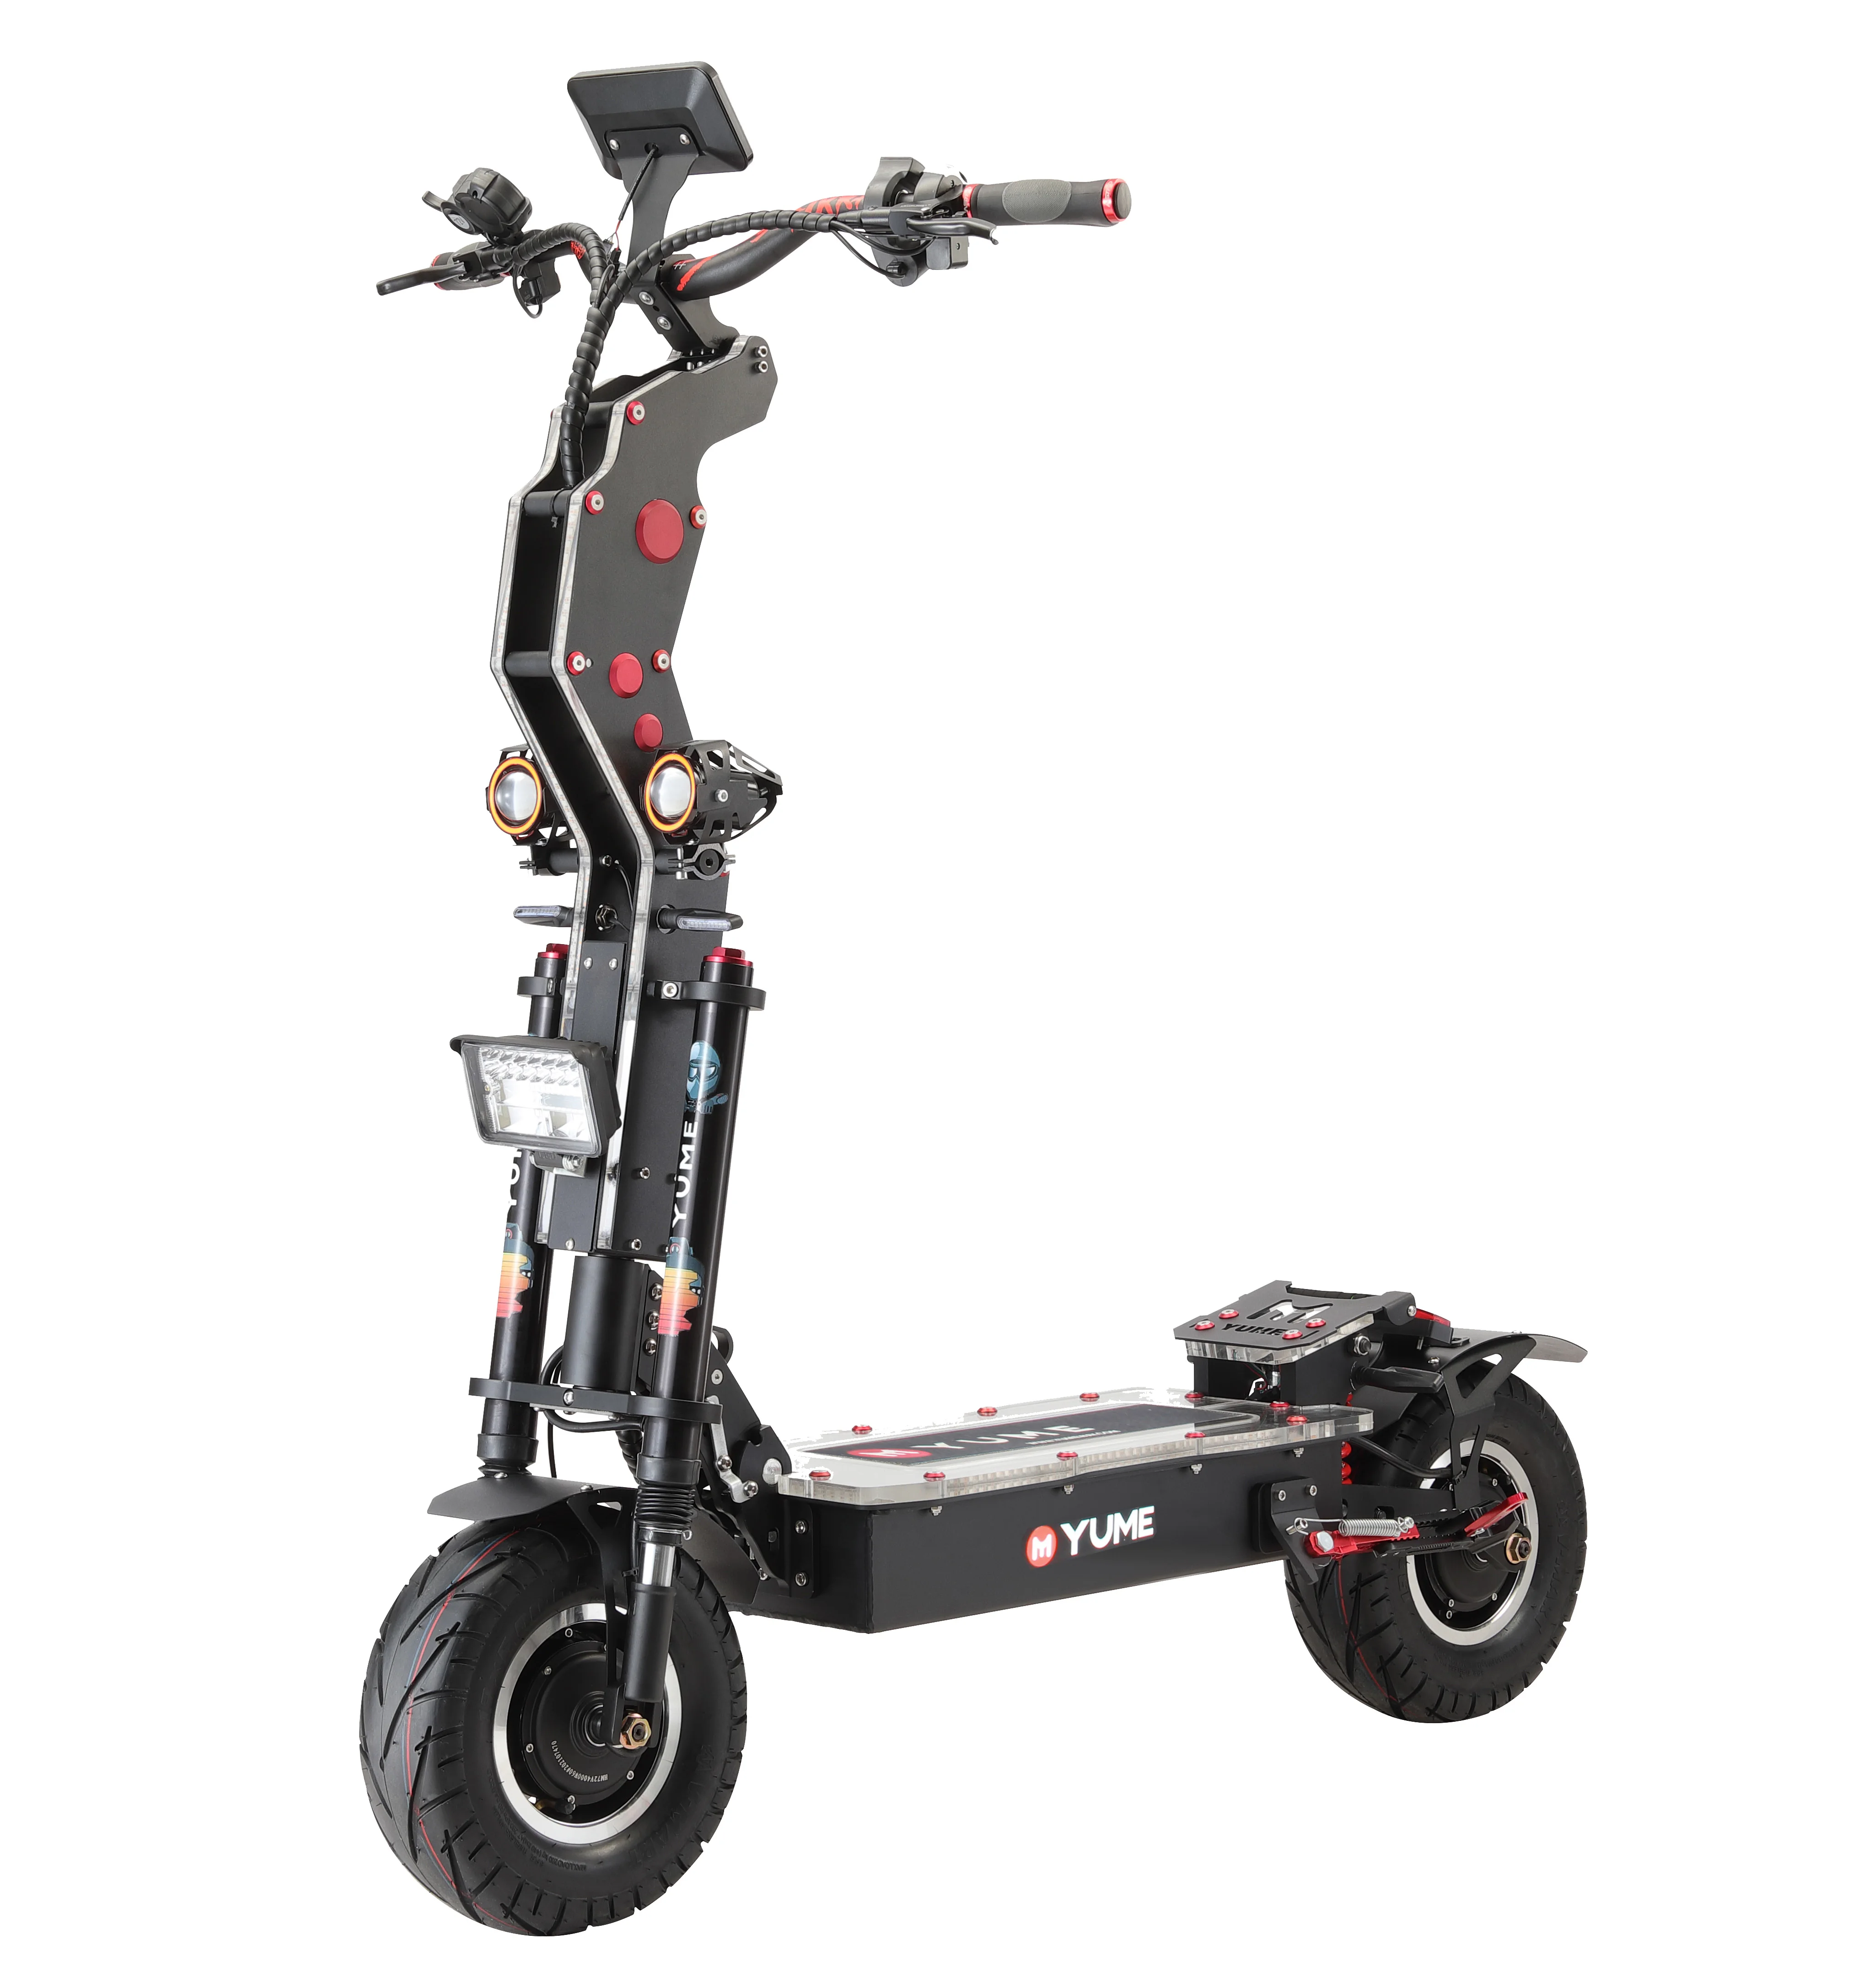 

[US Stock]YUME Top sale 72v 8000w Scooter dual motor 13 inch off road tire folding e-scooter for adult, Black